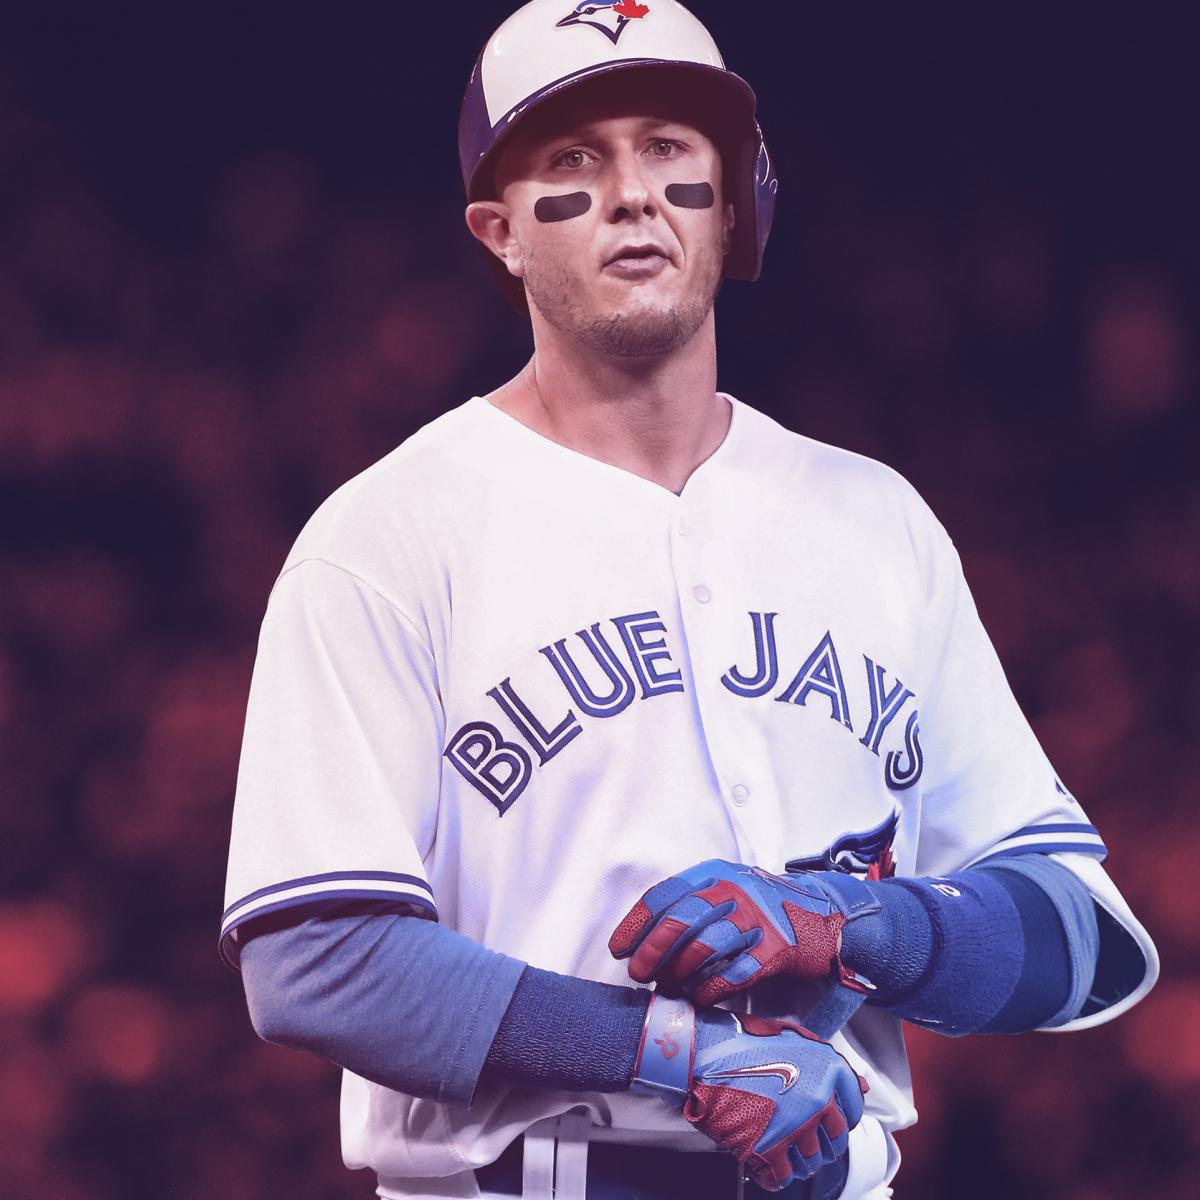 Not in Hall of Fame - 4. Troy Tulowitzki